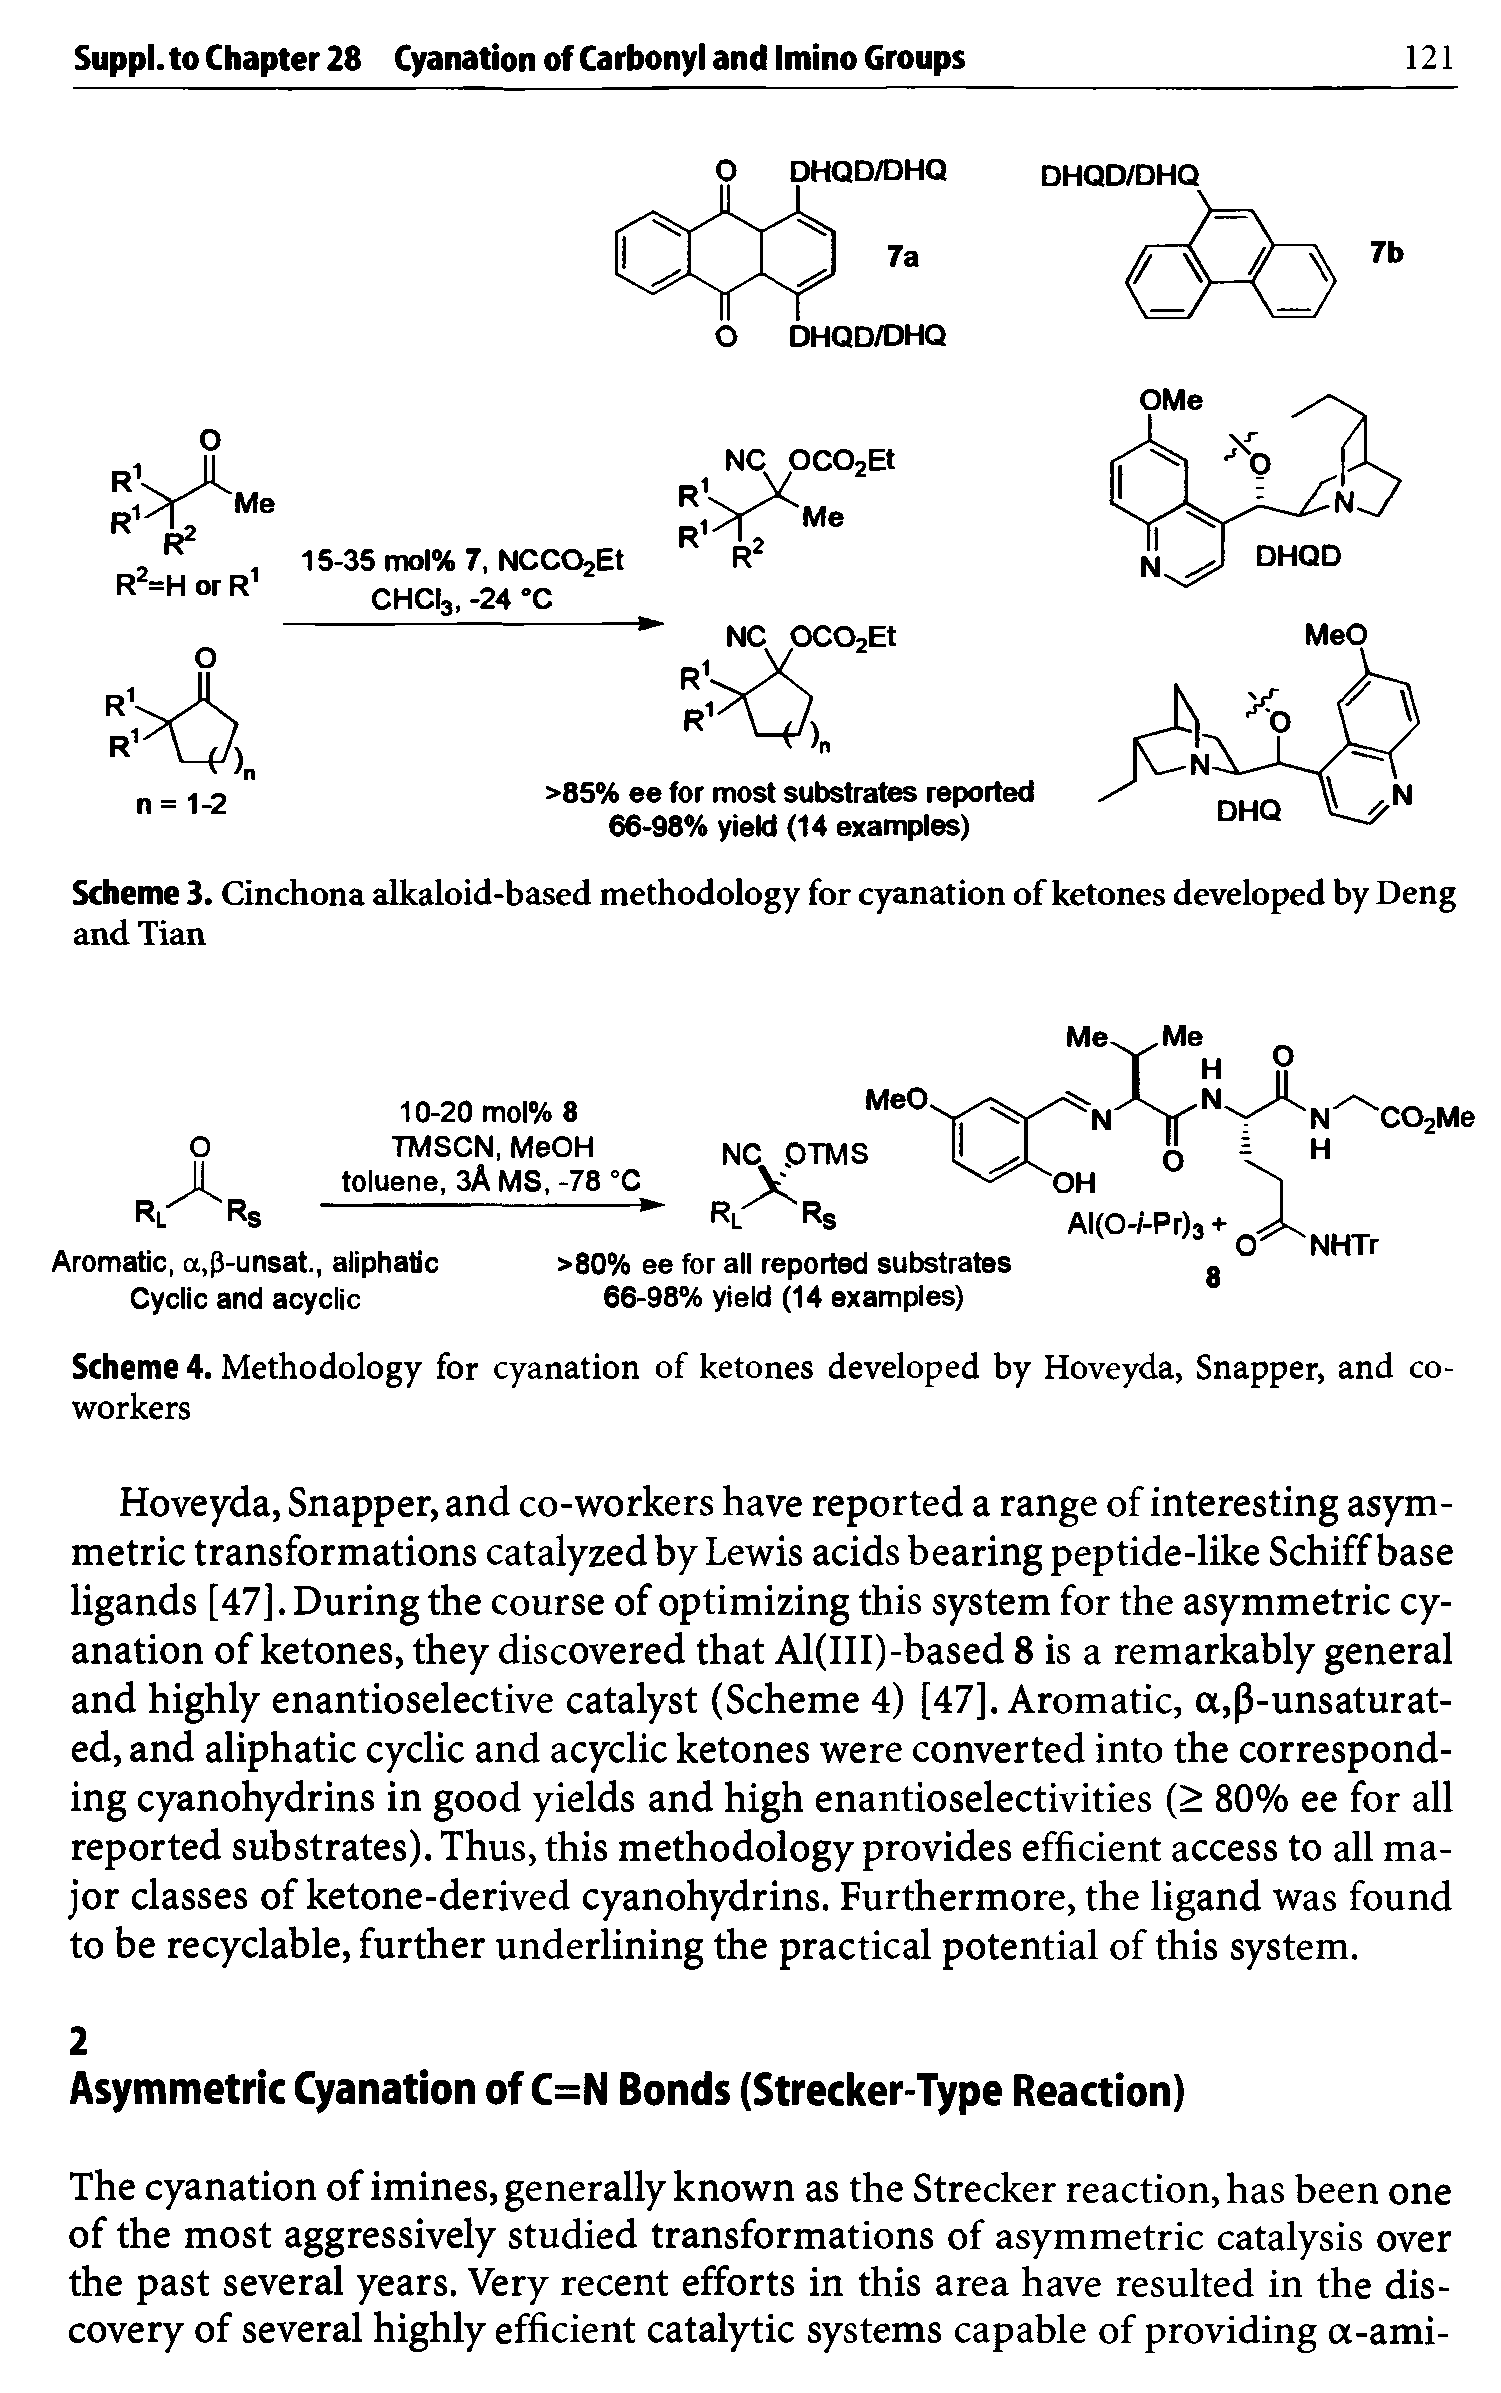 Scheme 3. Cinchona alkaloid-based methodology for cyanation of ketones developed by Deng and Tian...